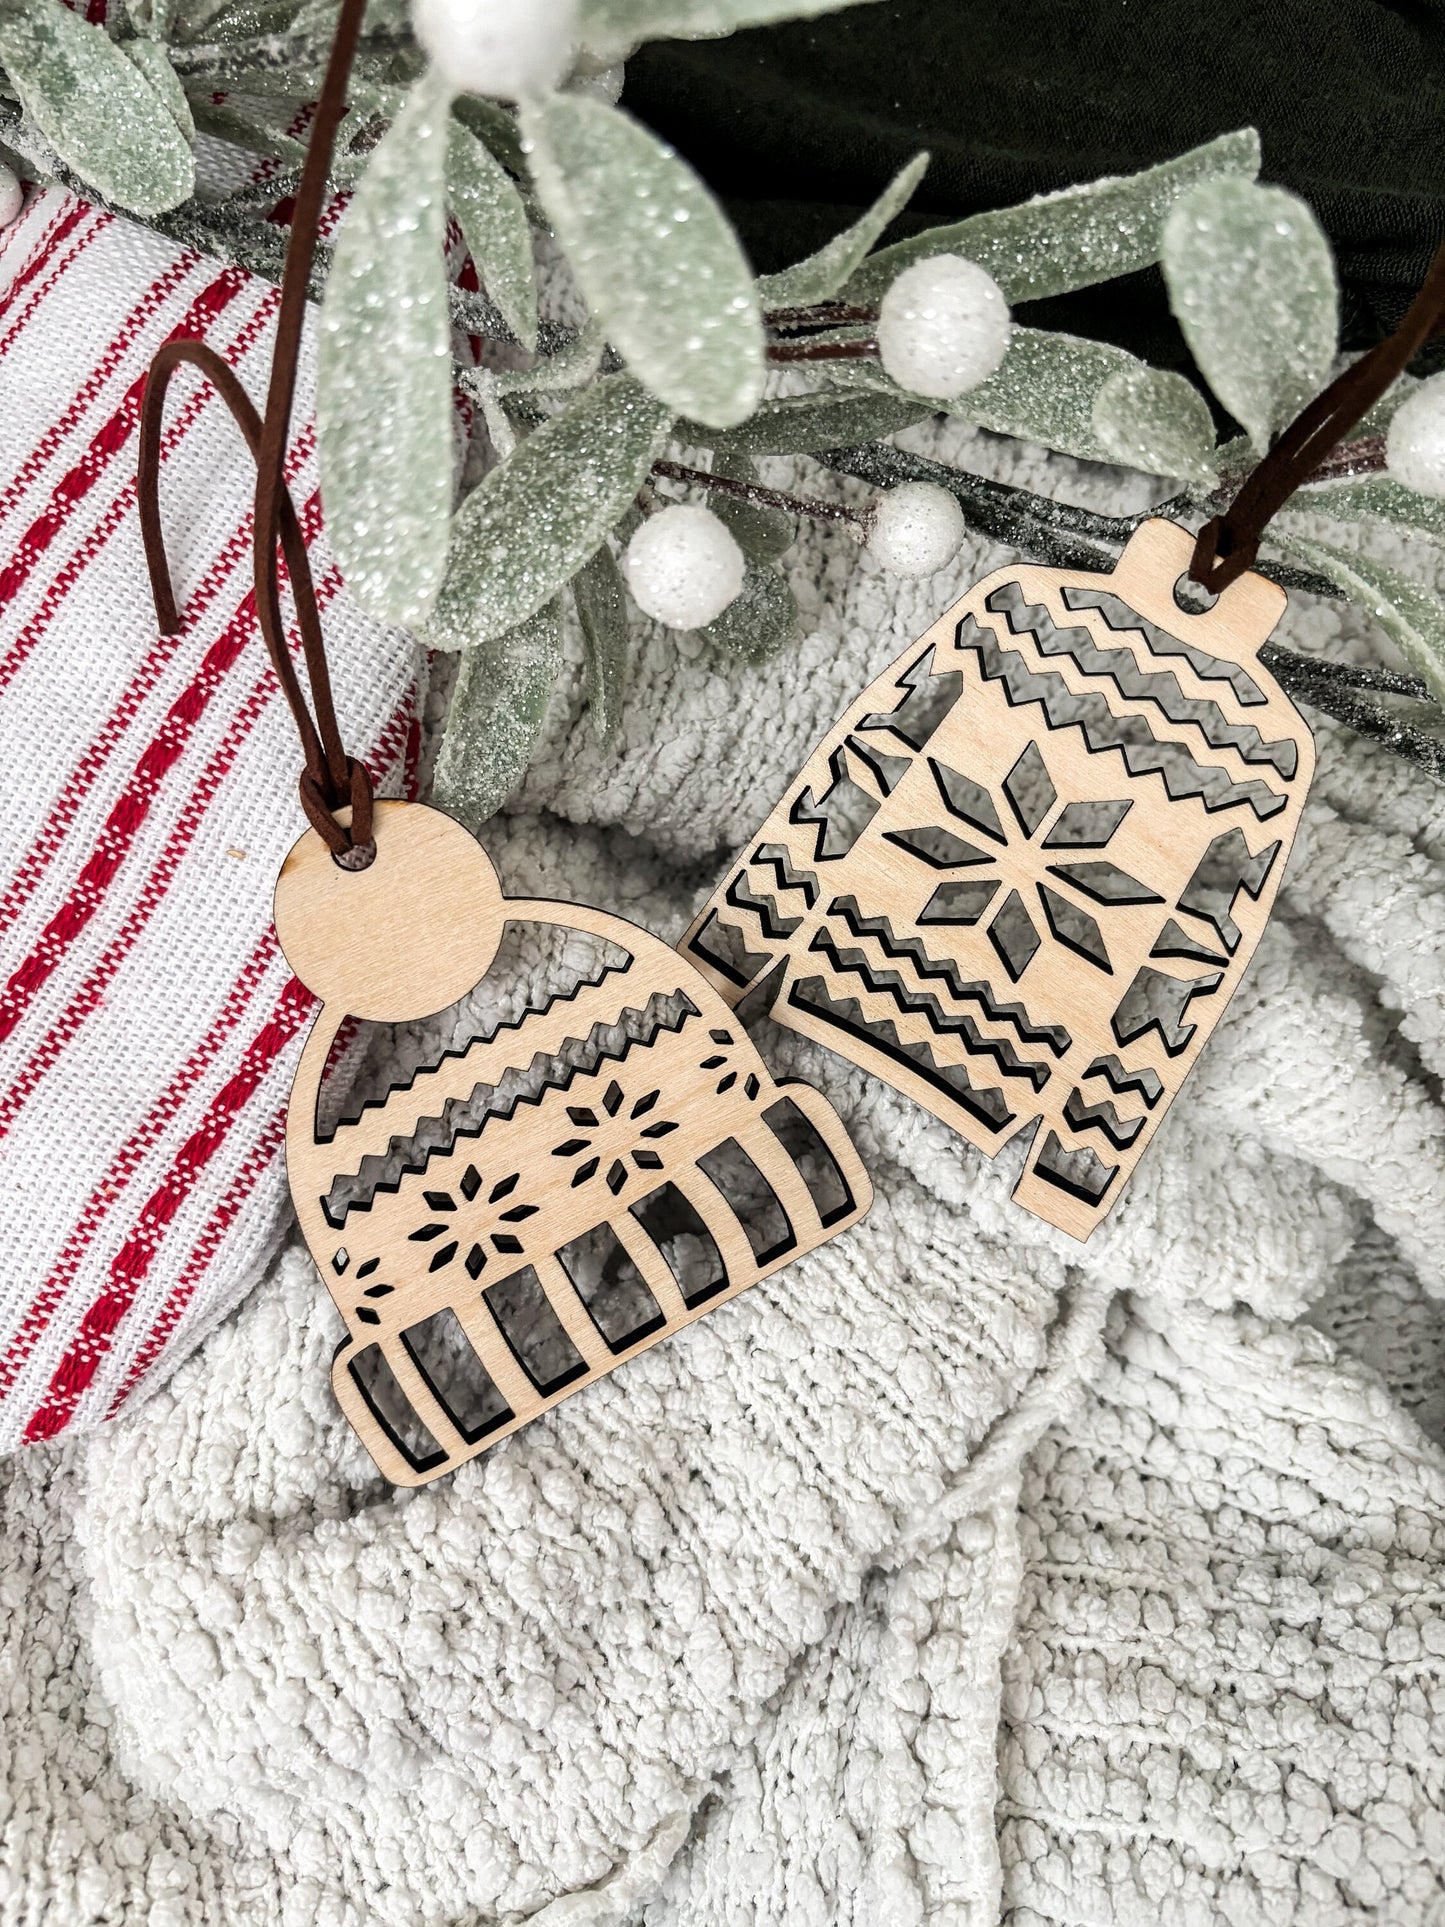 Ugly Christmas Sweater Ornament, Beanie Hat Ornament, Sweater ornament, Christmas ornament, Laser Cut Giftt, Wood ornament, Personalized